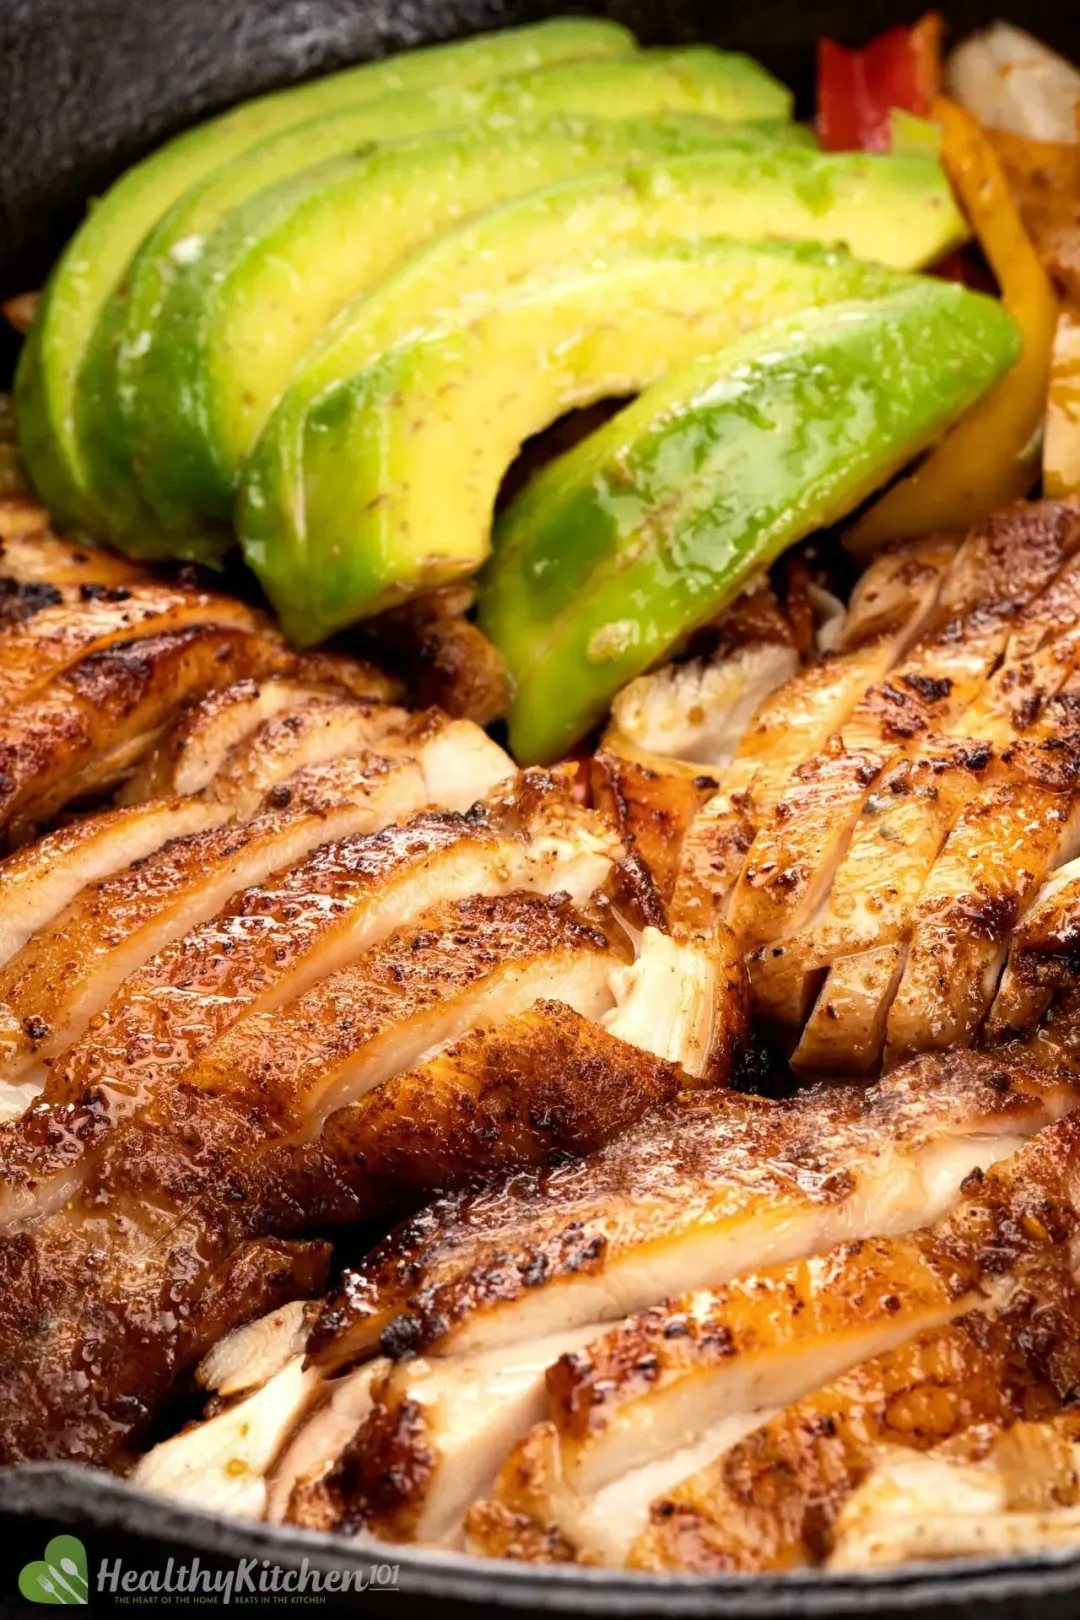 A close up shot of sliced cooked chicken and avocado slices